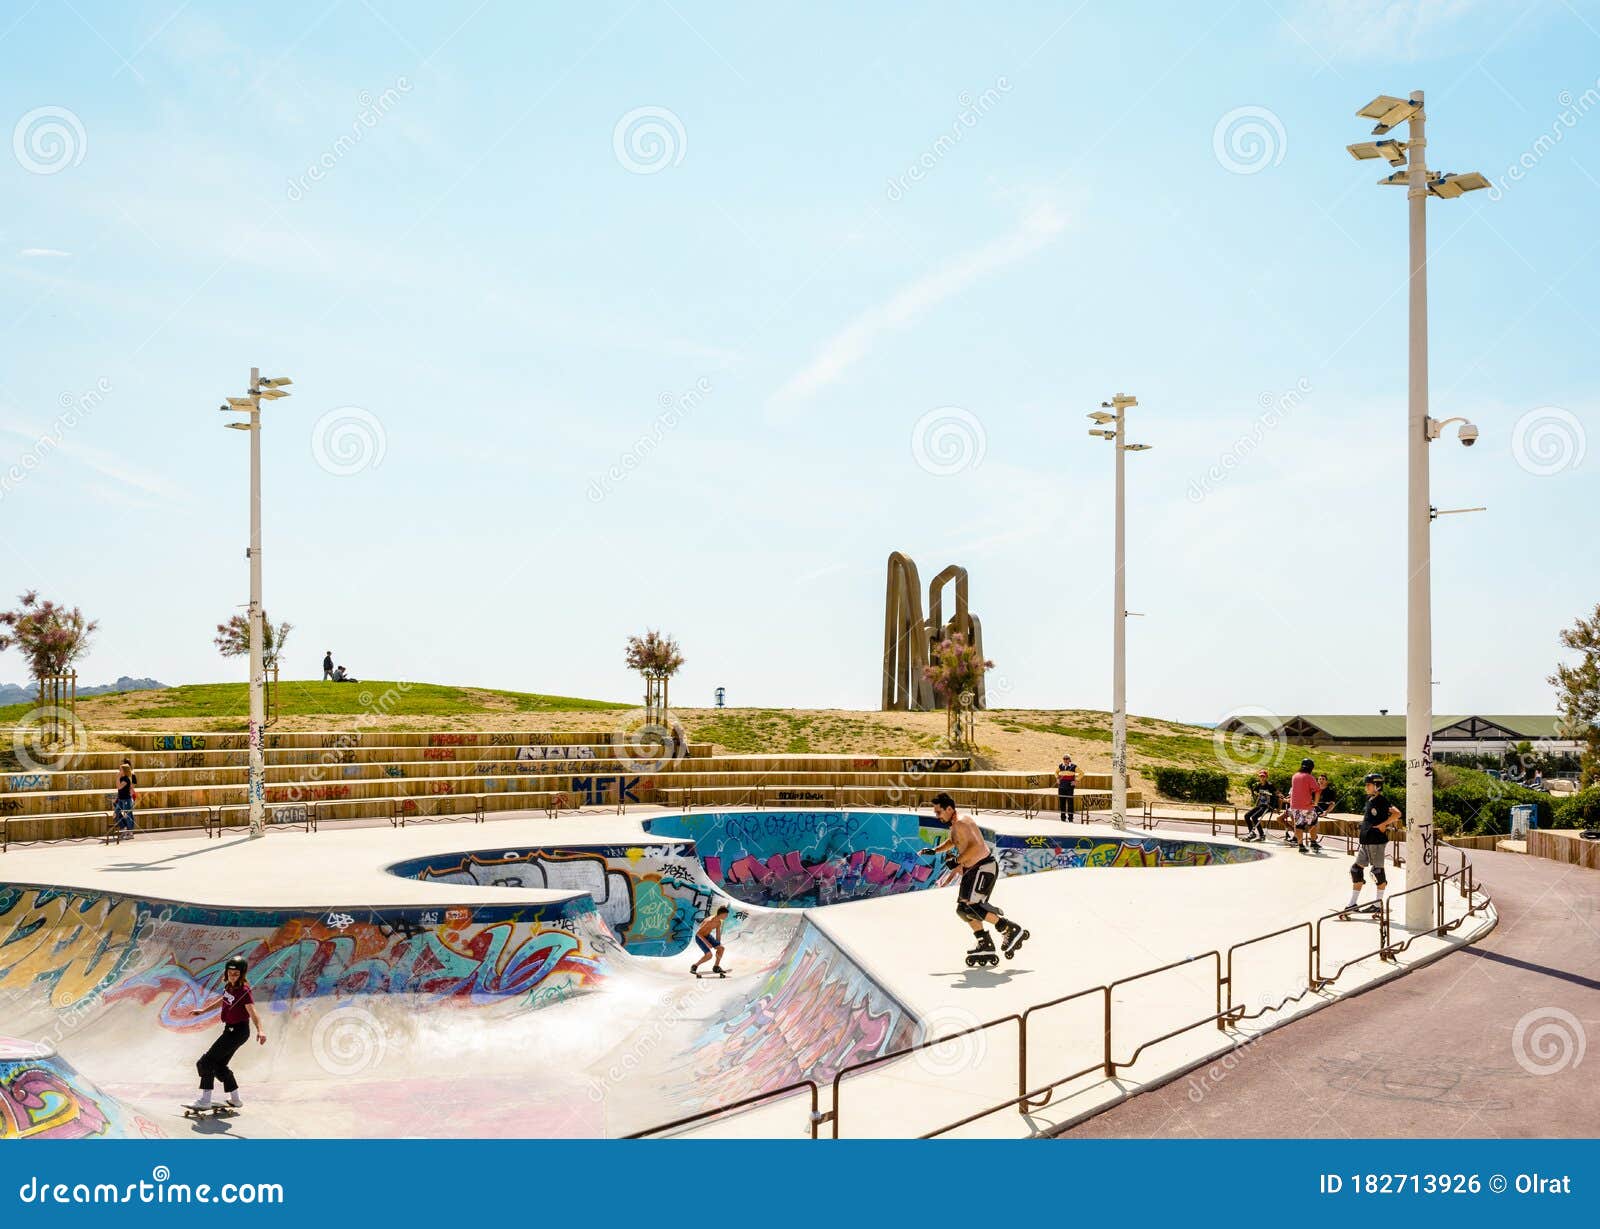 Young People Skating and Skateboarding at the Prado Skatepark in Marseille,  France Editorial Photo - Image of blade, famous: 182713926